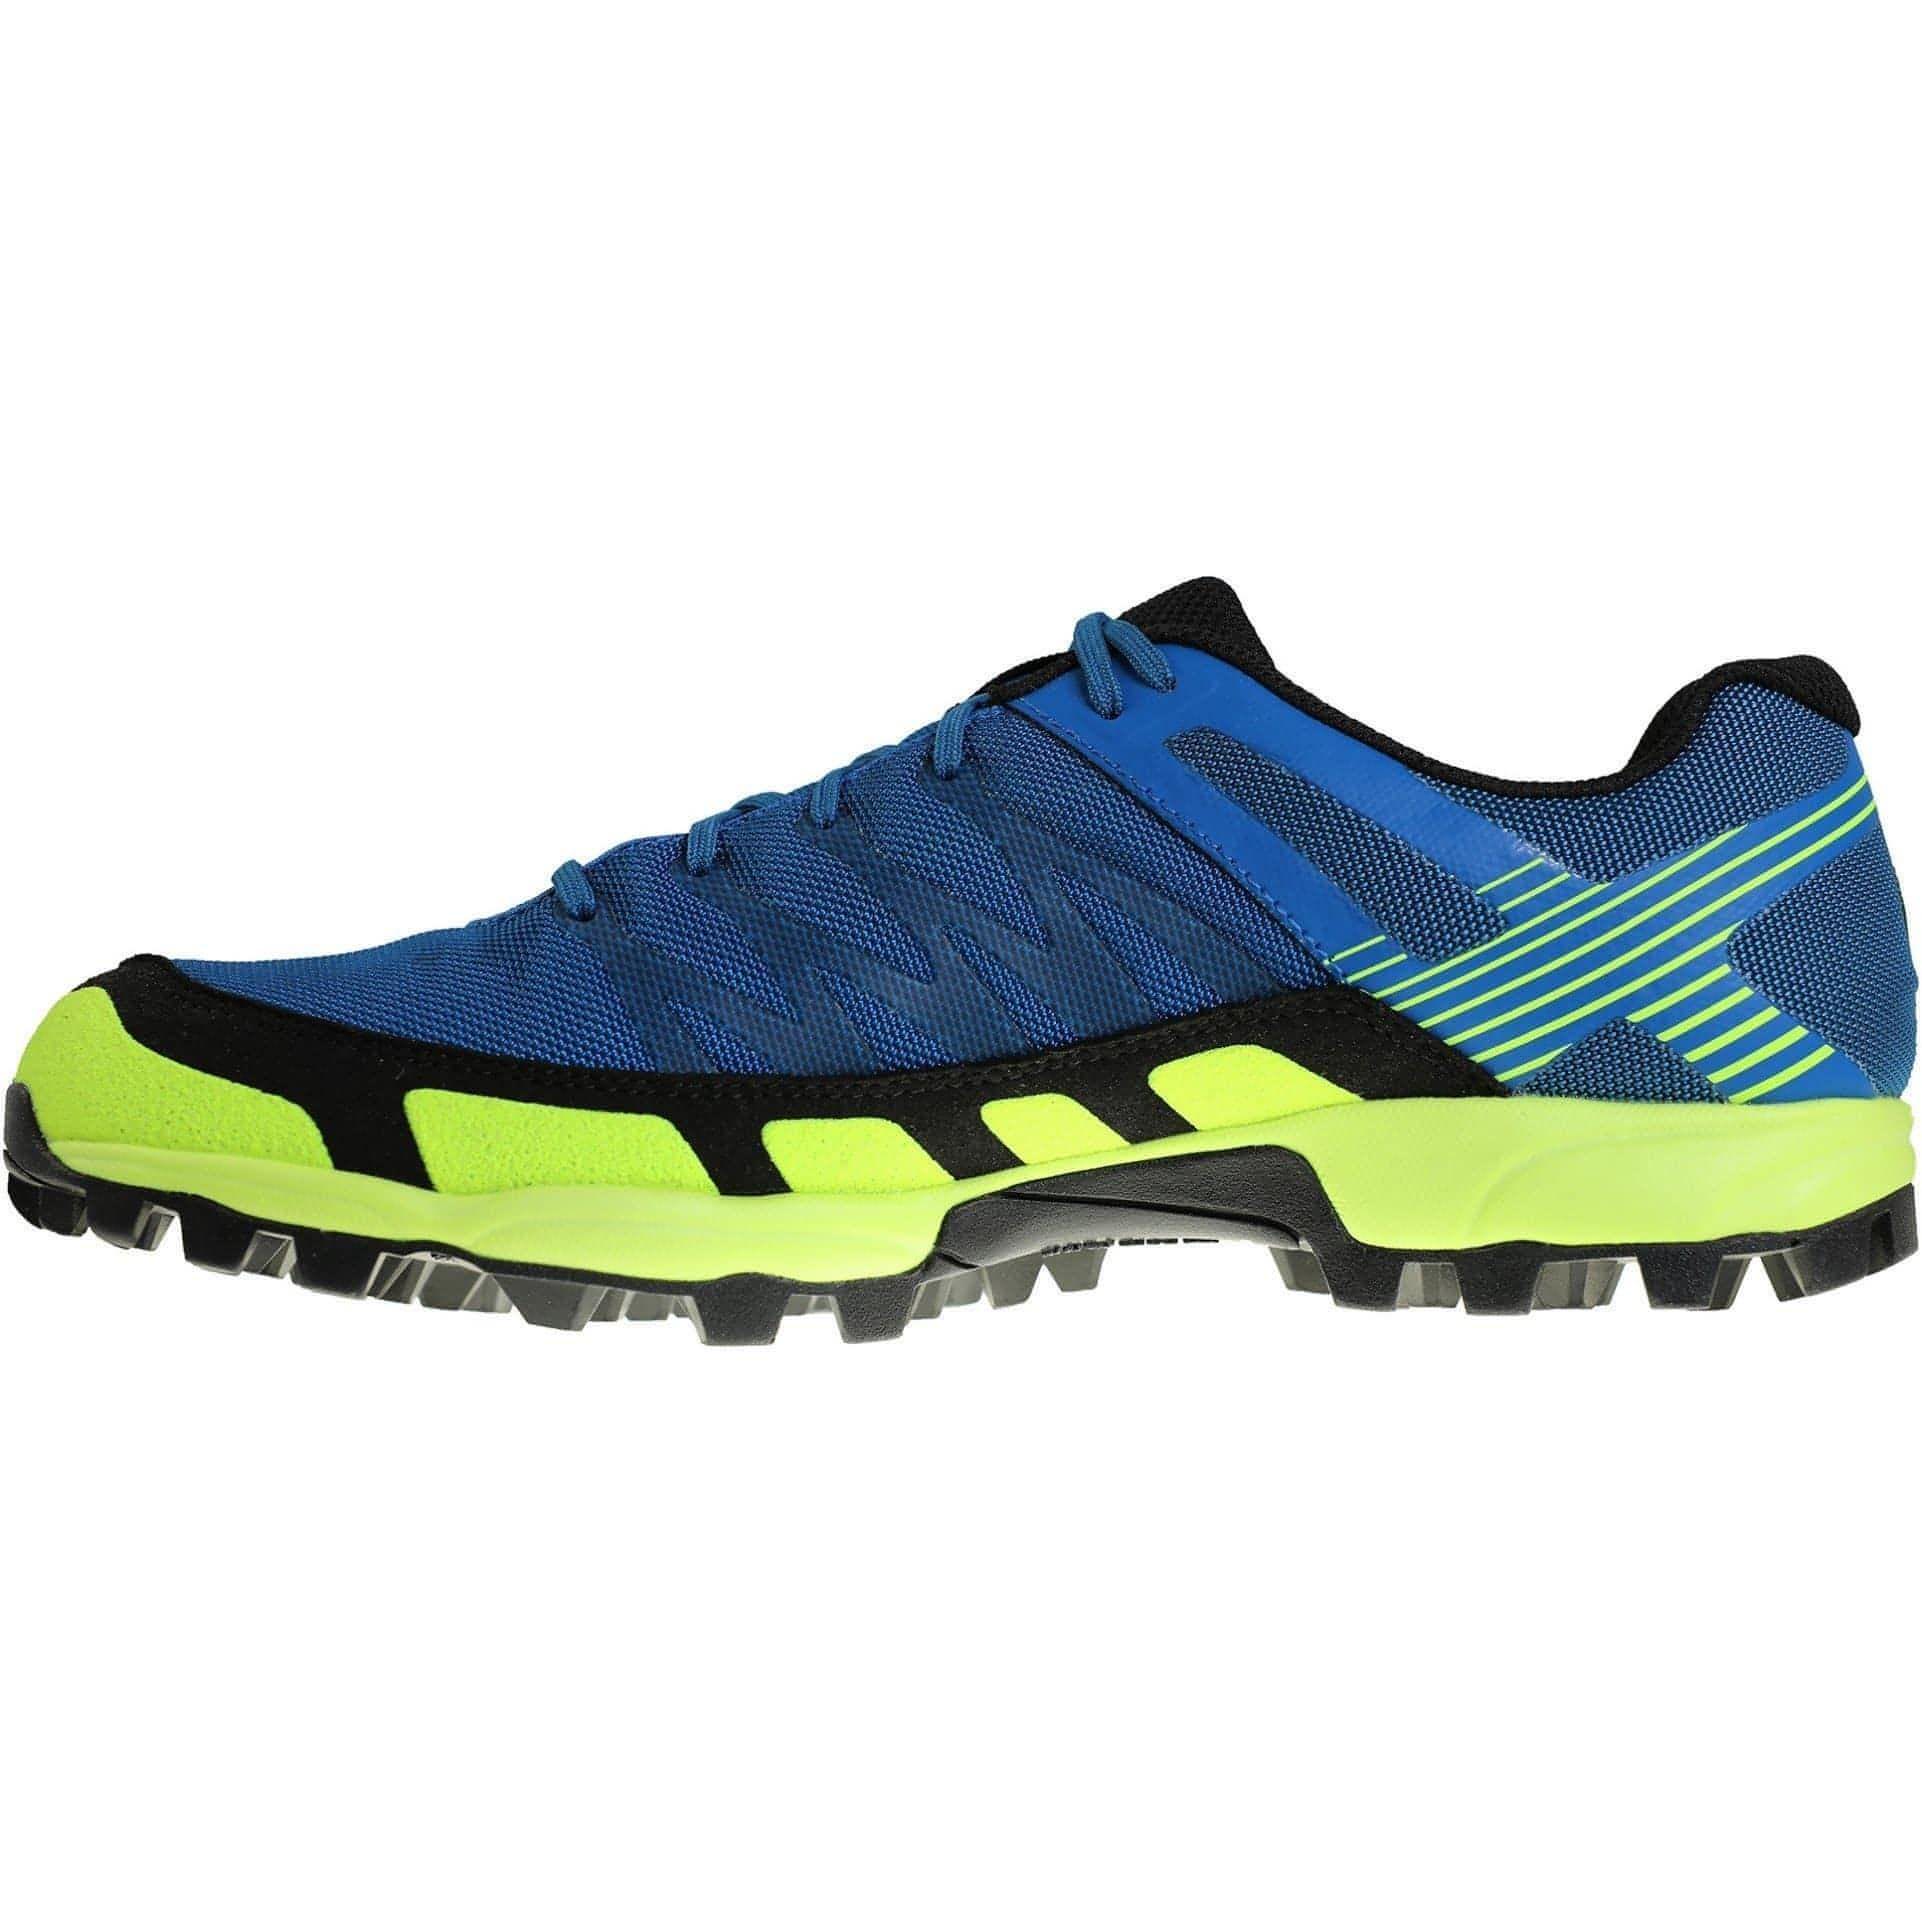 Inov8 Mudclaw 300 Mens Trail Running Shoes - Blue - Start Fitness